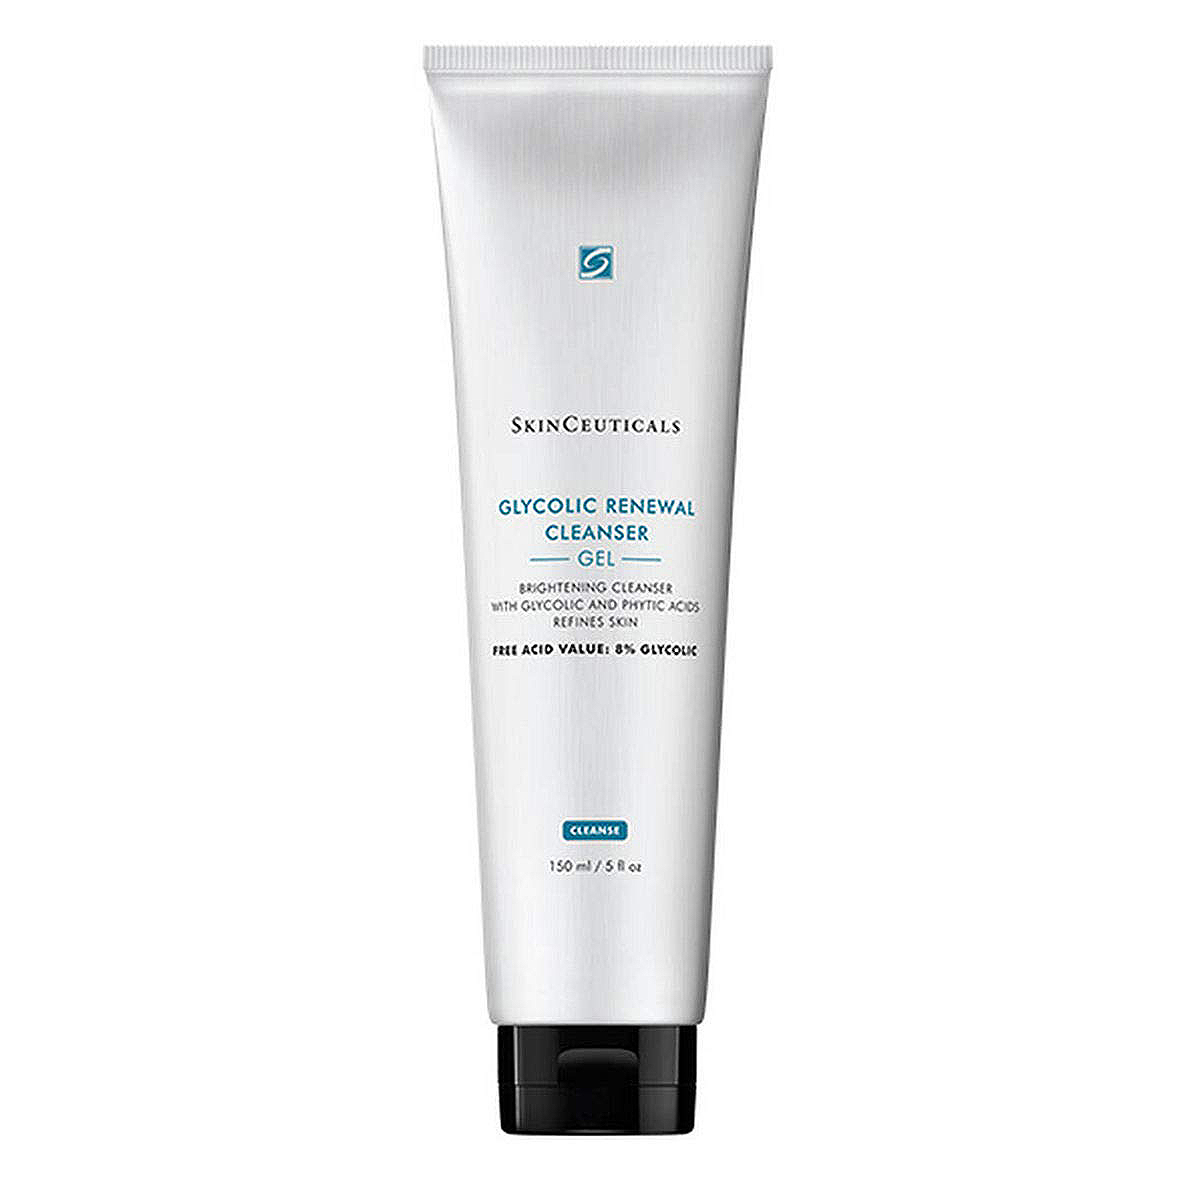 best exfoliating face wash luxe dermstore skinceuticals glycolic acid